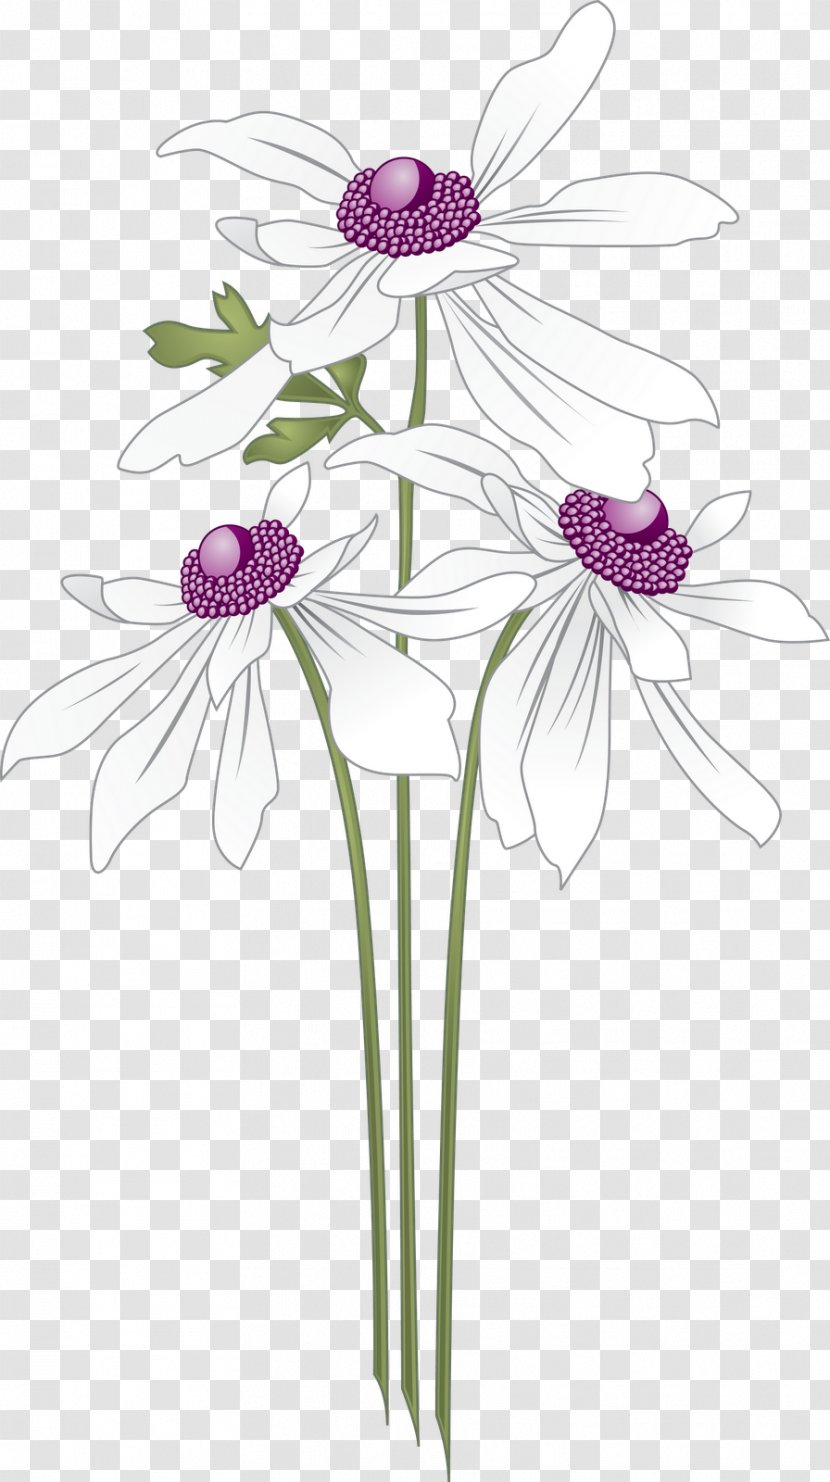 VECTOR FLOWERS - Daisy Family - Cut Flowers Transparent PNG